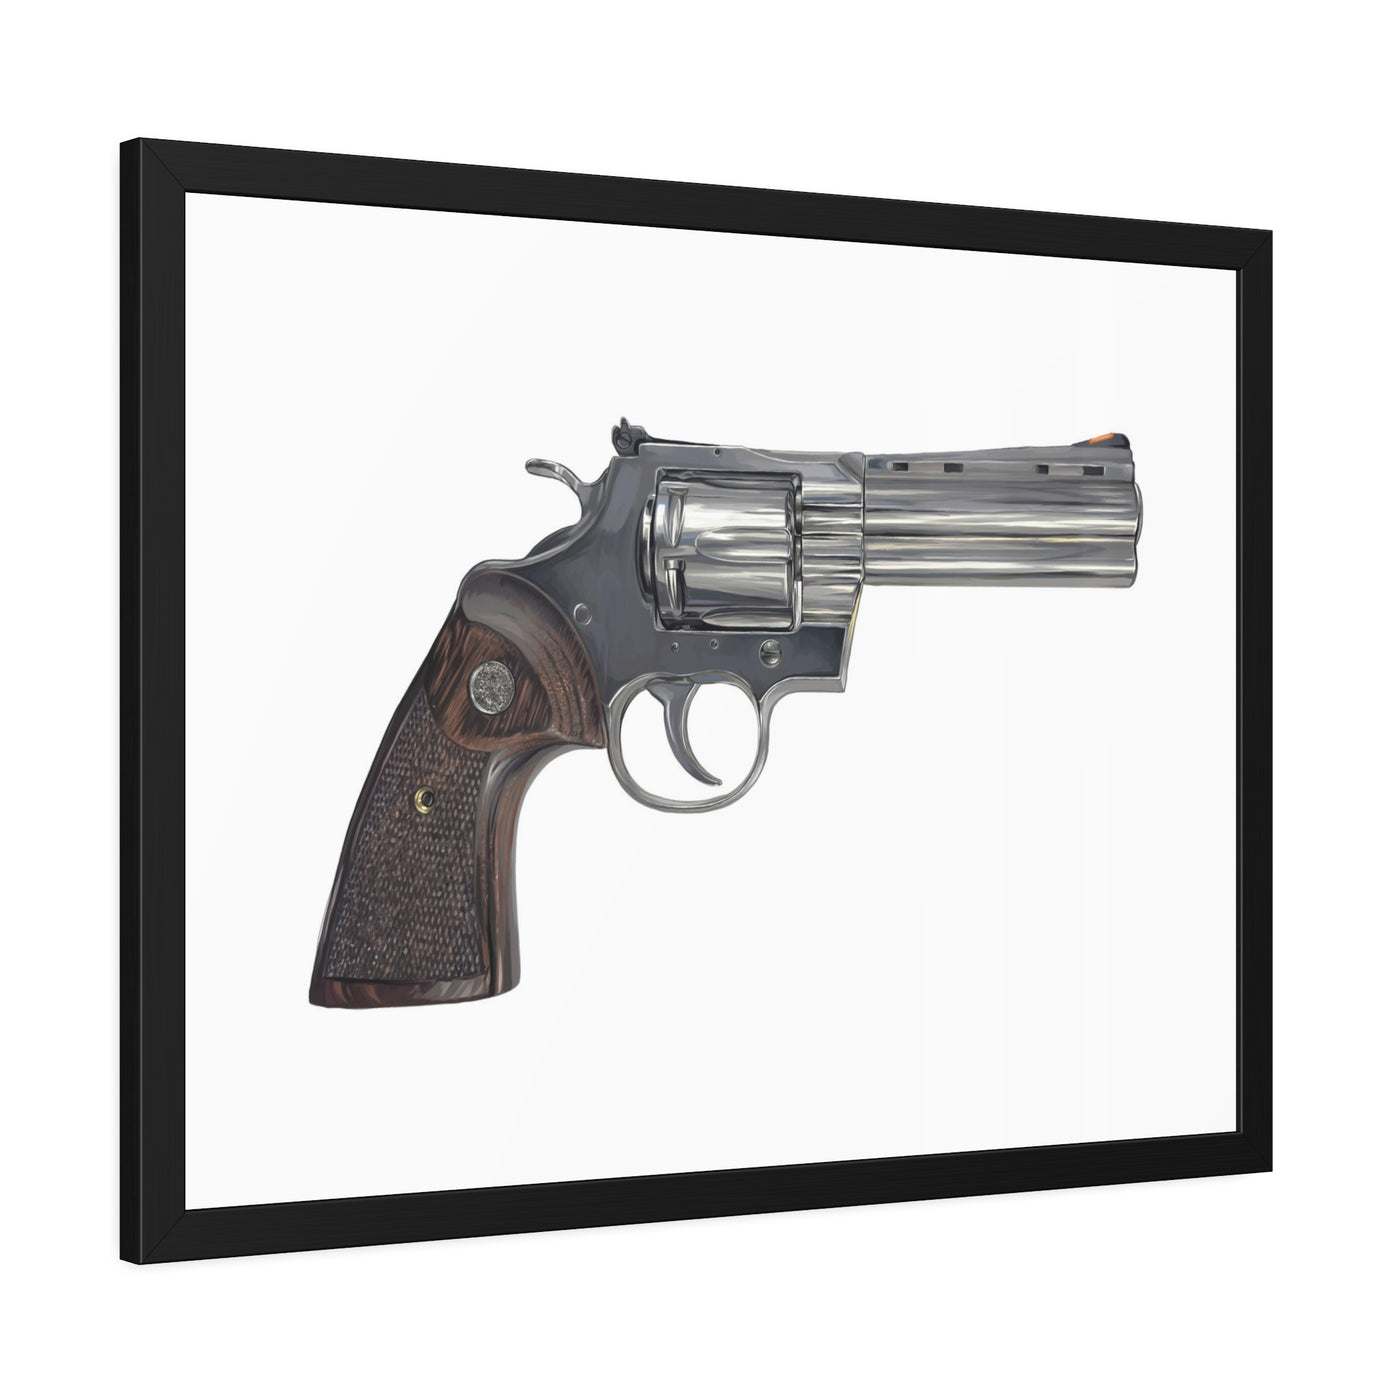 Wood & Stainless .357 Magnum Revolver Painting - Just The Piece - Black Frame - Value Collection